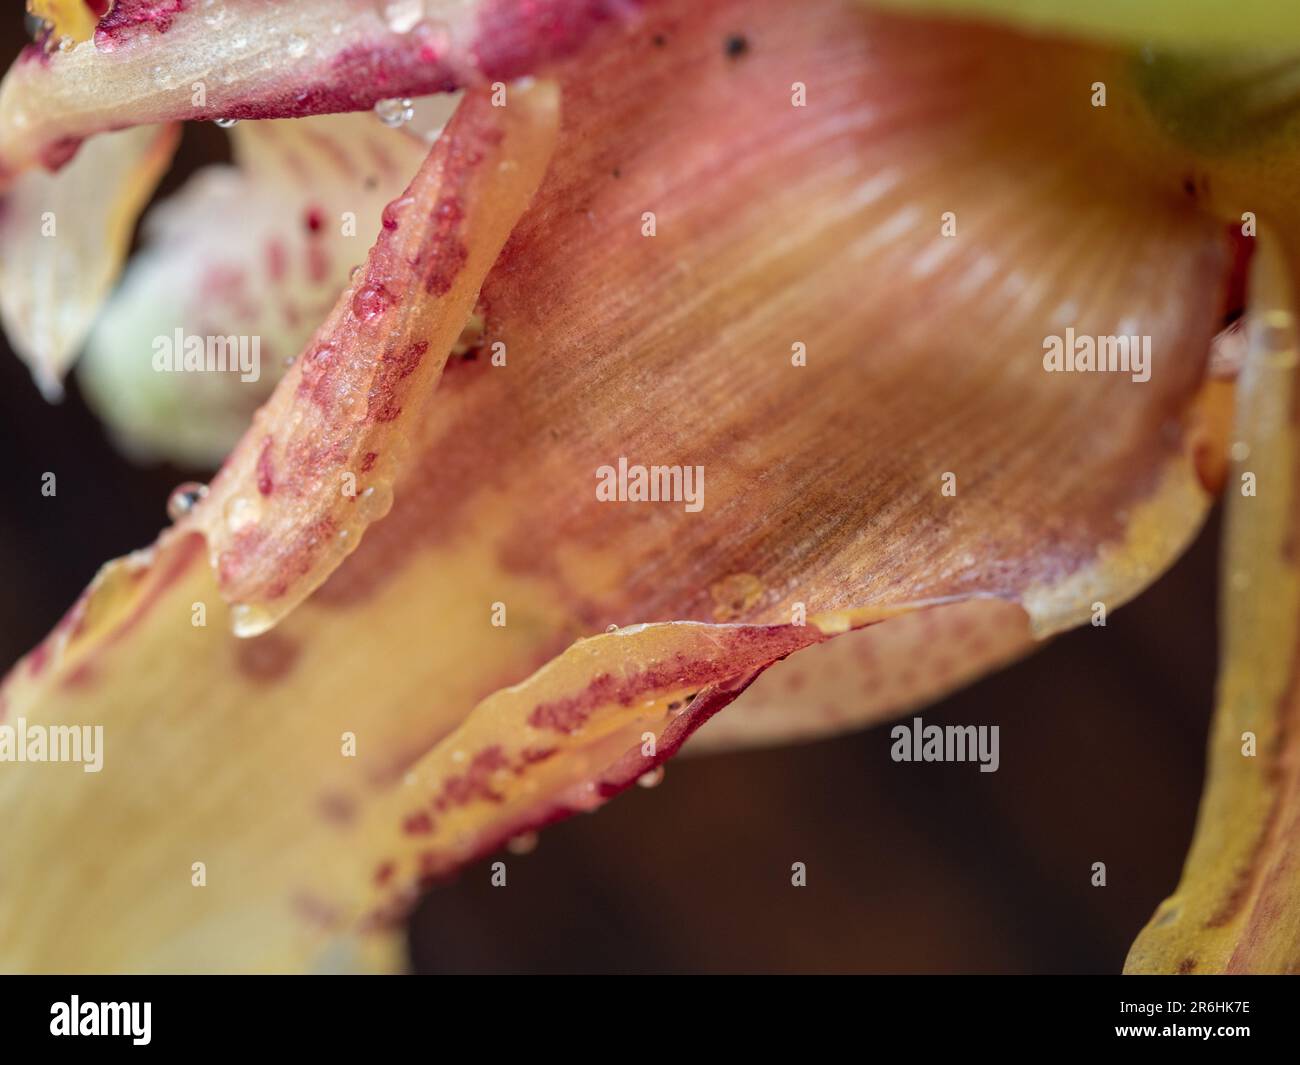 Petal closeup of a Yellow and red patterned Stanhopea Orchid flower in bloom, Australian coastal garden Stock Photo